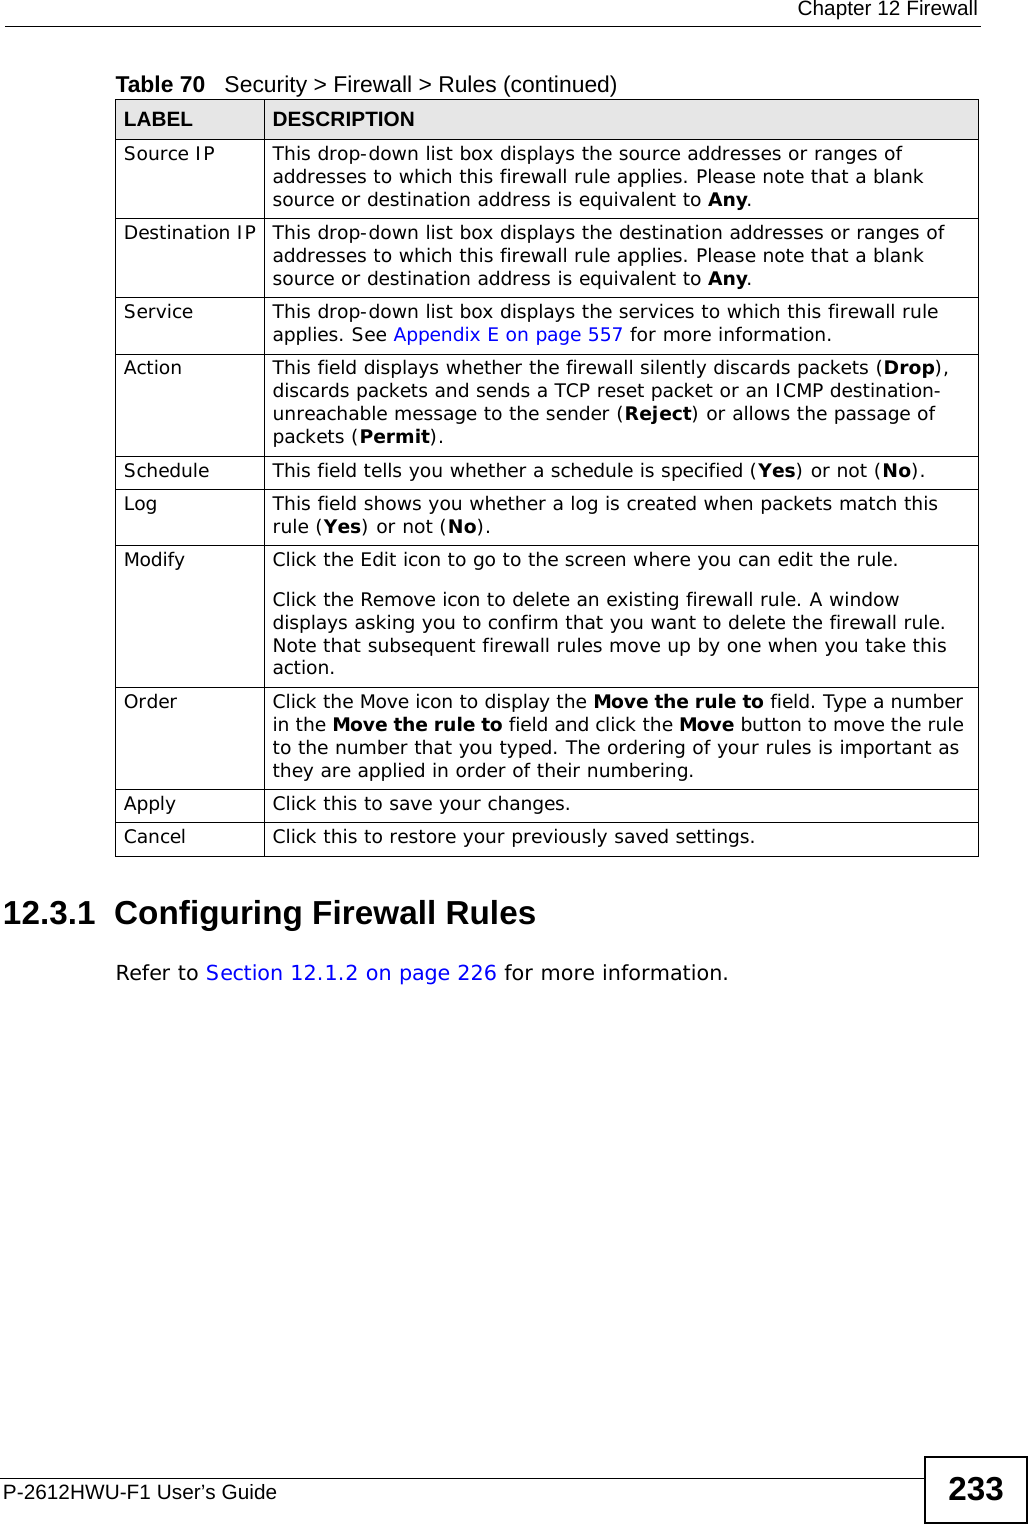  Chapter 12 FirewallP-2612HWU-F1 User’s Guide 23312.3.1  Configuring Firewall Rules  Refer to Section 12.1.2 on page 226 for more information. Source IP This drop-down list box displays the source addresses or ranges of addresses to which this firewall rule applies. Please note that a blank source or destination address is equivalent to Any.Destination IP This drop-down list box displays the destination addresses or ranges of addresses to which this firewall rule applies. Please note that a blank source or destination address is equivalent to Any.Service  This drop-down list box displays the services to which this firewall rule applies. See Appendix E on page 557 for more information.Action This field displays whether the firewall silently discards packets (Drop), discards packets and sends a TCP reset packet or an ICMP destination-unreachable message to the sender (Reject) or allows the passage of packets (Permit).Schedule This field tells you whether a schedule is specified (Yes) or not (No).Log This field shows you whether a log is created when packets match this rule (Yes) or not (No).Modify Click the Edit icon to go to the screen where you can edit the rule.Click the Remove icon to delete an existing firewall rule. A window displays asking you to confirm that you want to delete the firewall rule. Note that subsequent firewall rules move up by one when you take this action.Order Click the Move icon to display the Move the rule to field. Type a number in the Move the rule to field and click the Move button to move the rule to the number that you typed. The ordering of your rules is important as they are applied in order of their numbering.Apply Click this to save your changes.Cancel Click this to restore your previously saved settings.Table 70   Security &gt; Firewall &gt; Rules (continued)LABEL DESCRIPTION